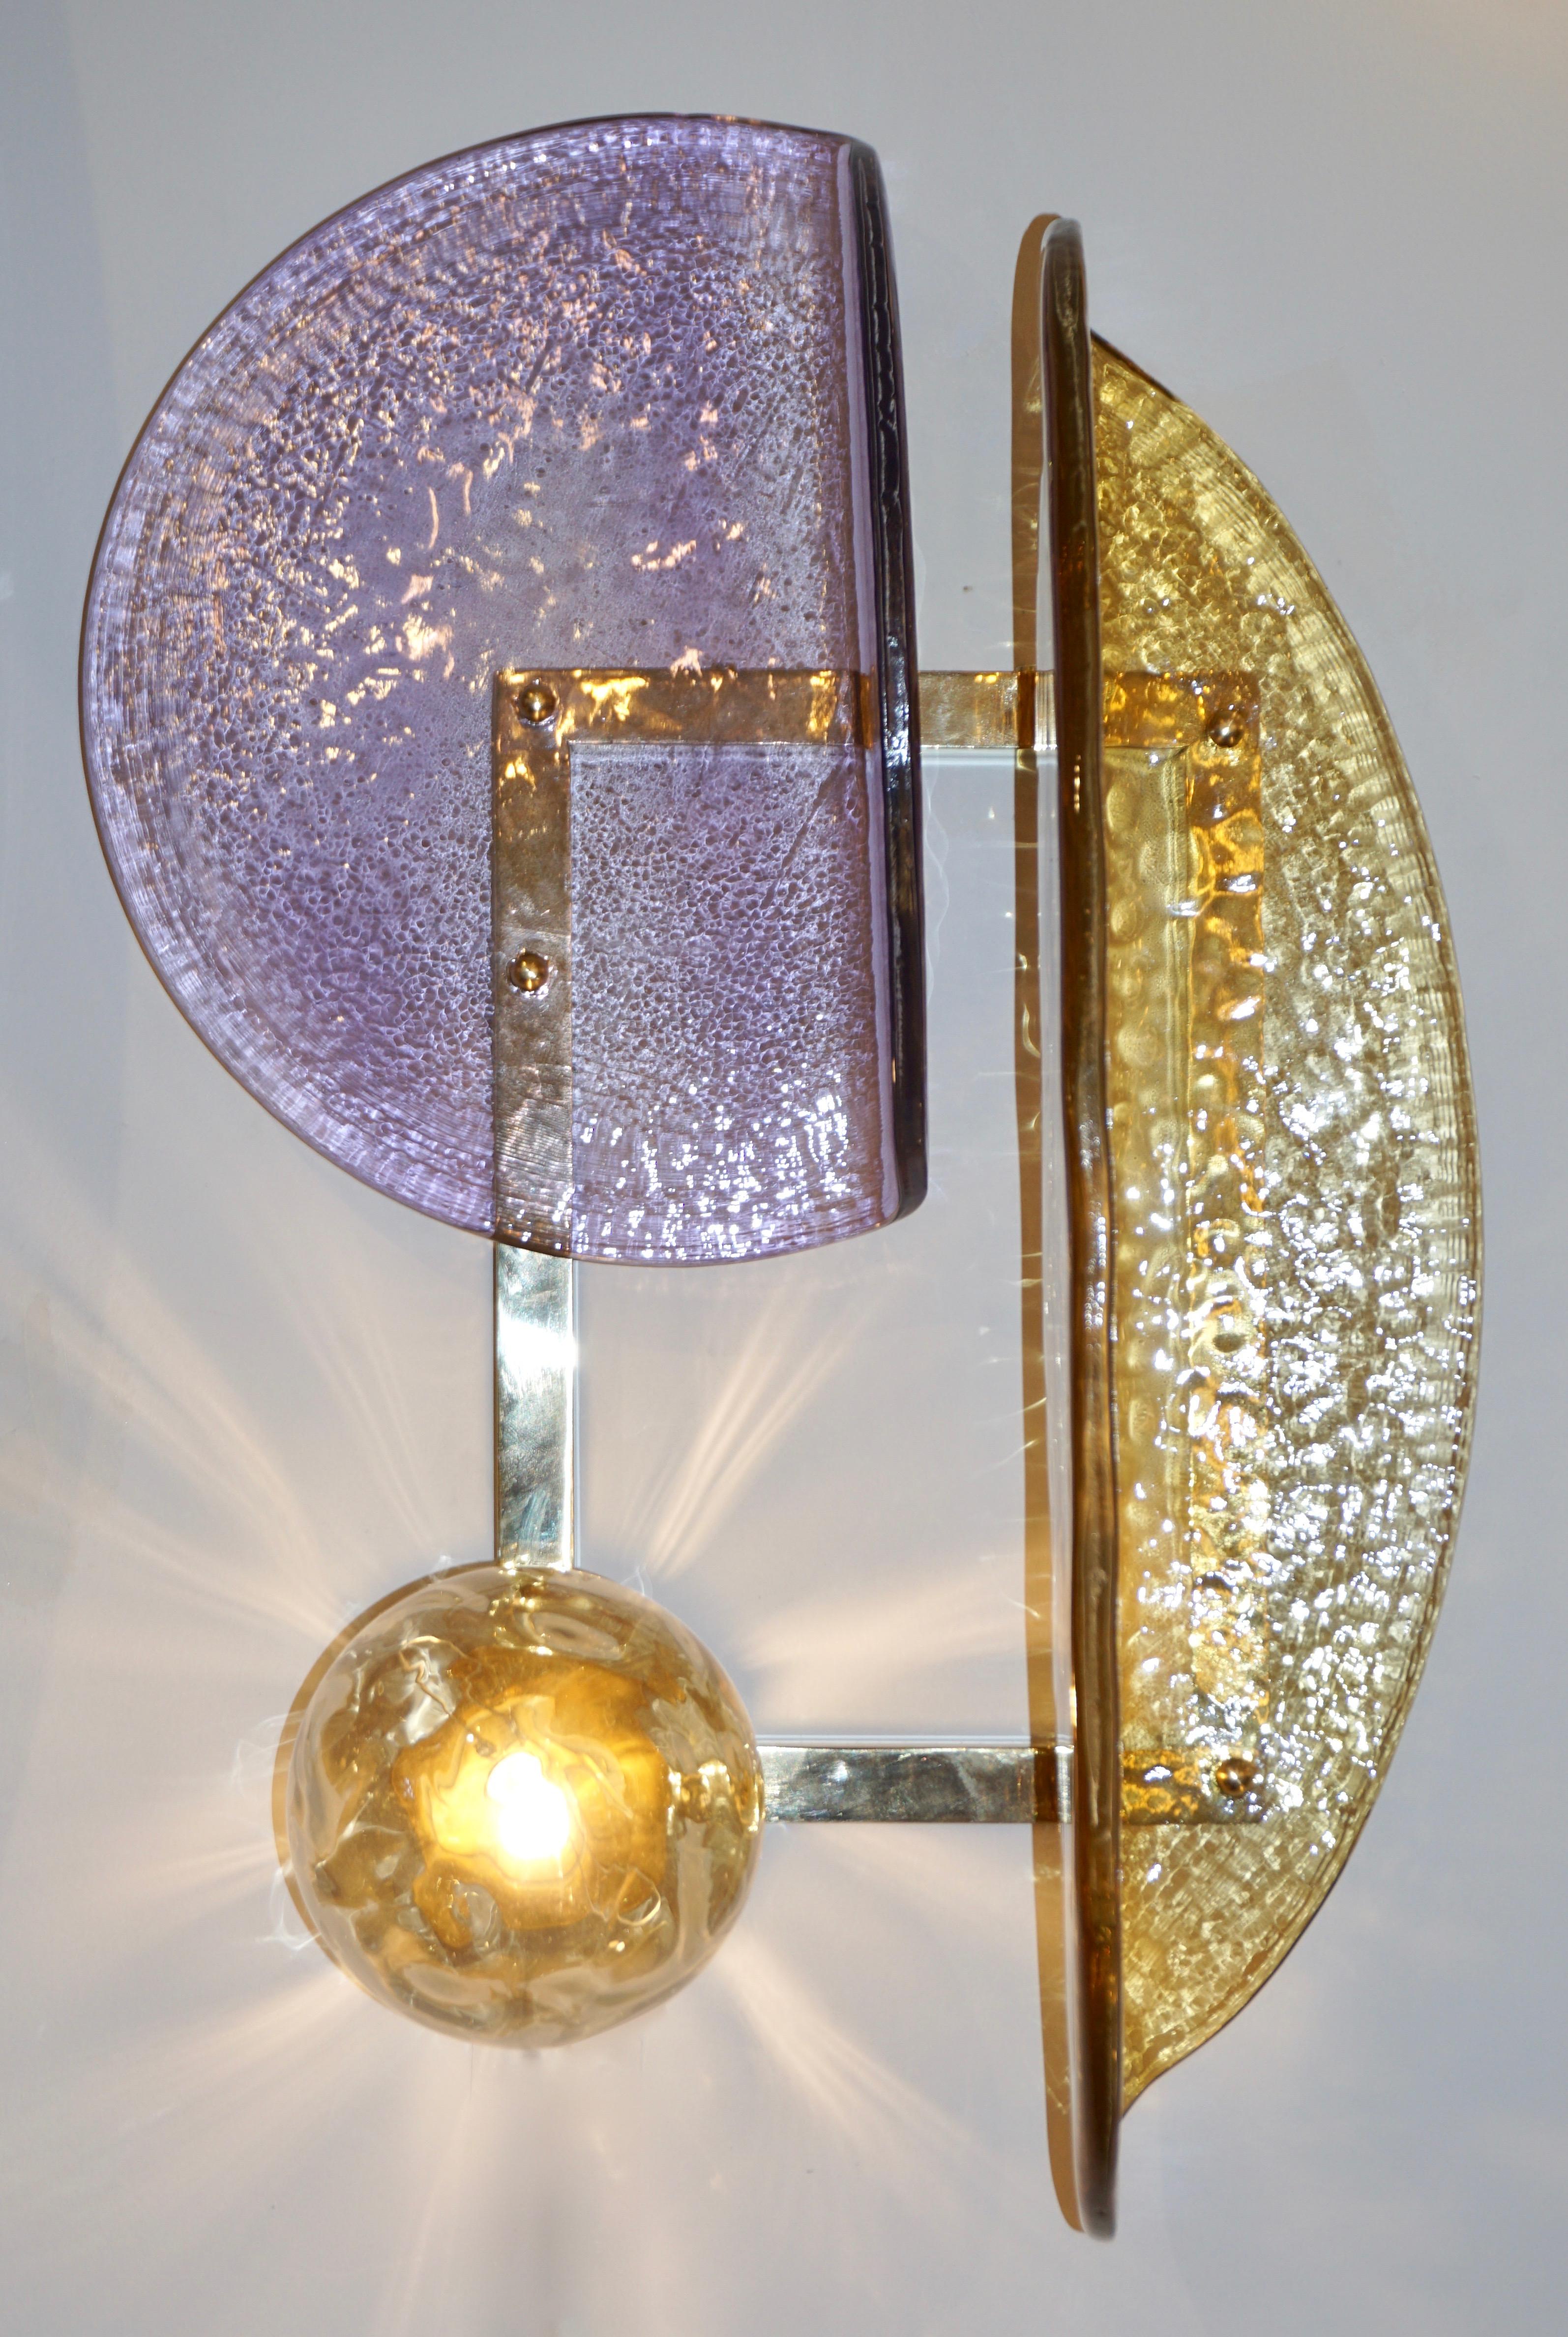 A contemporary creation with a unique modern geometric design, these wall lights are entirely handcrafted in Italy. The molded textured glass elements of organic curved shape, in amber gold and purple violet Murano glass, are mounted in a geometric